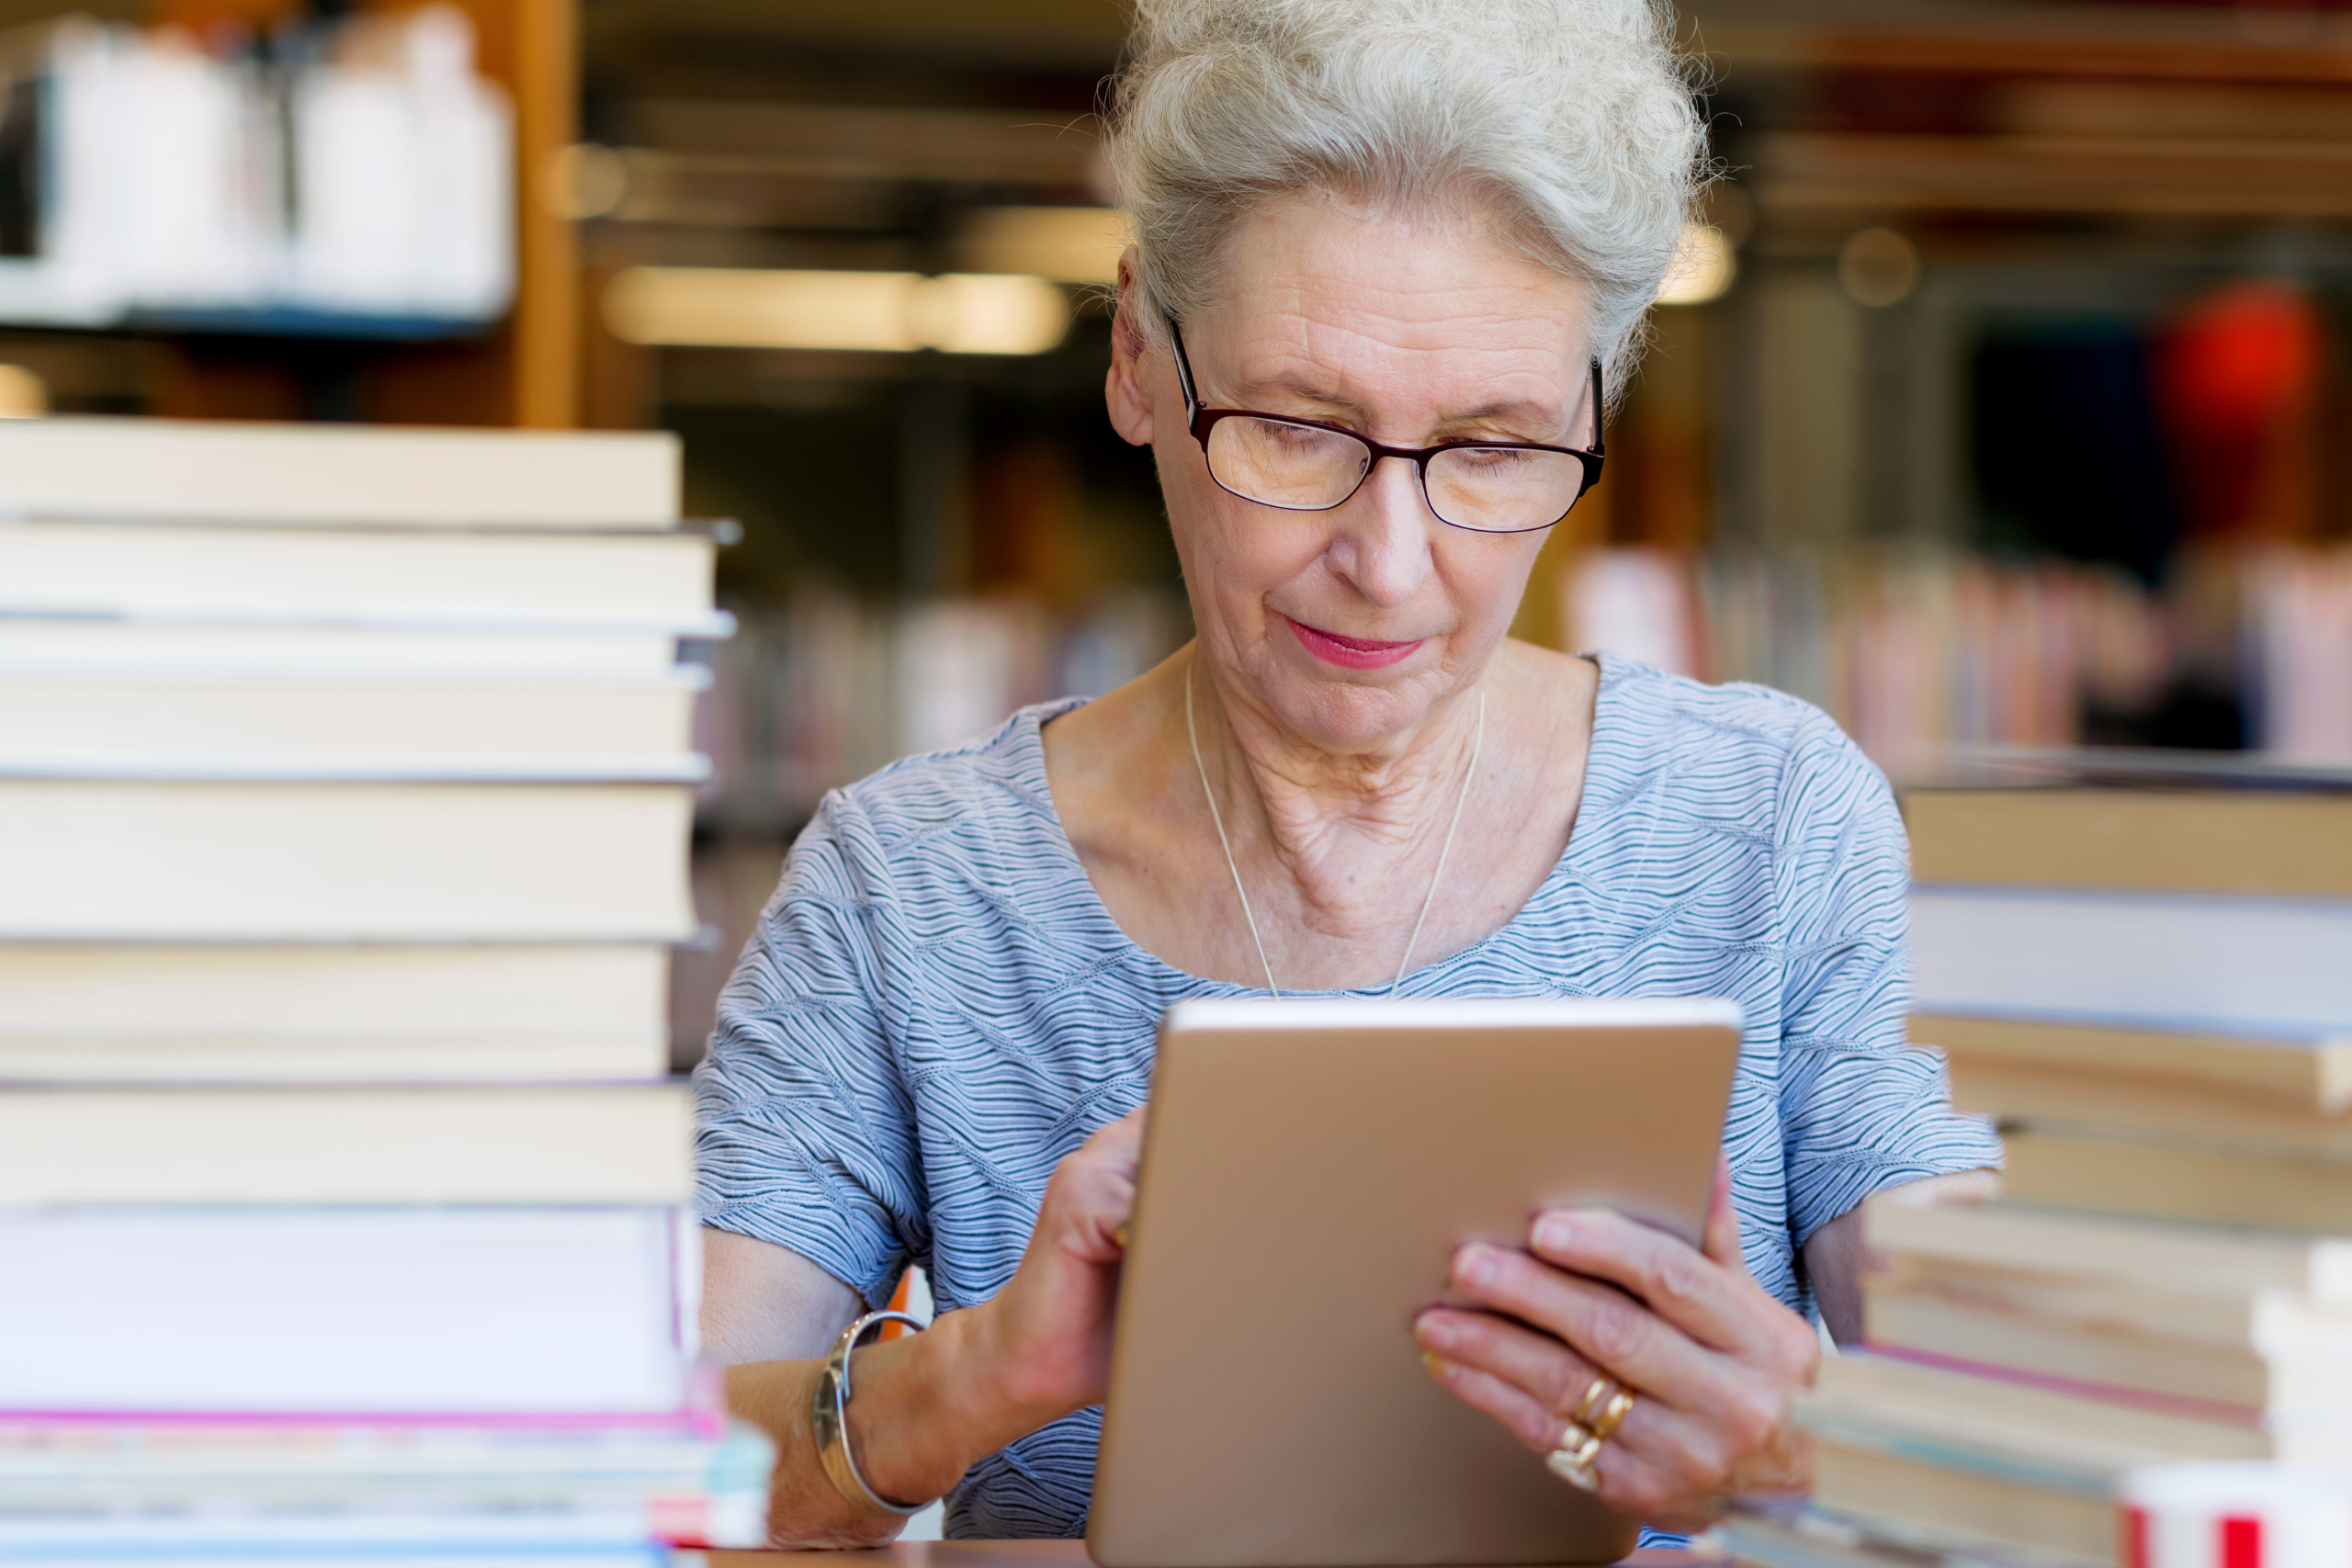 An older woman sits in a library while using a tablet.